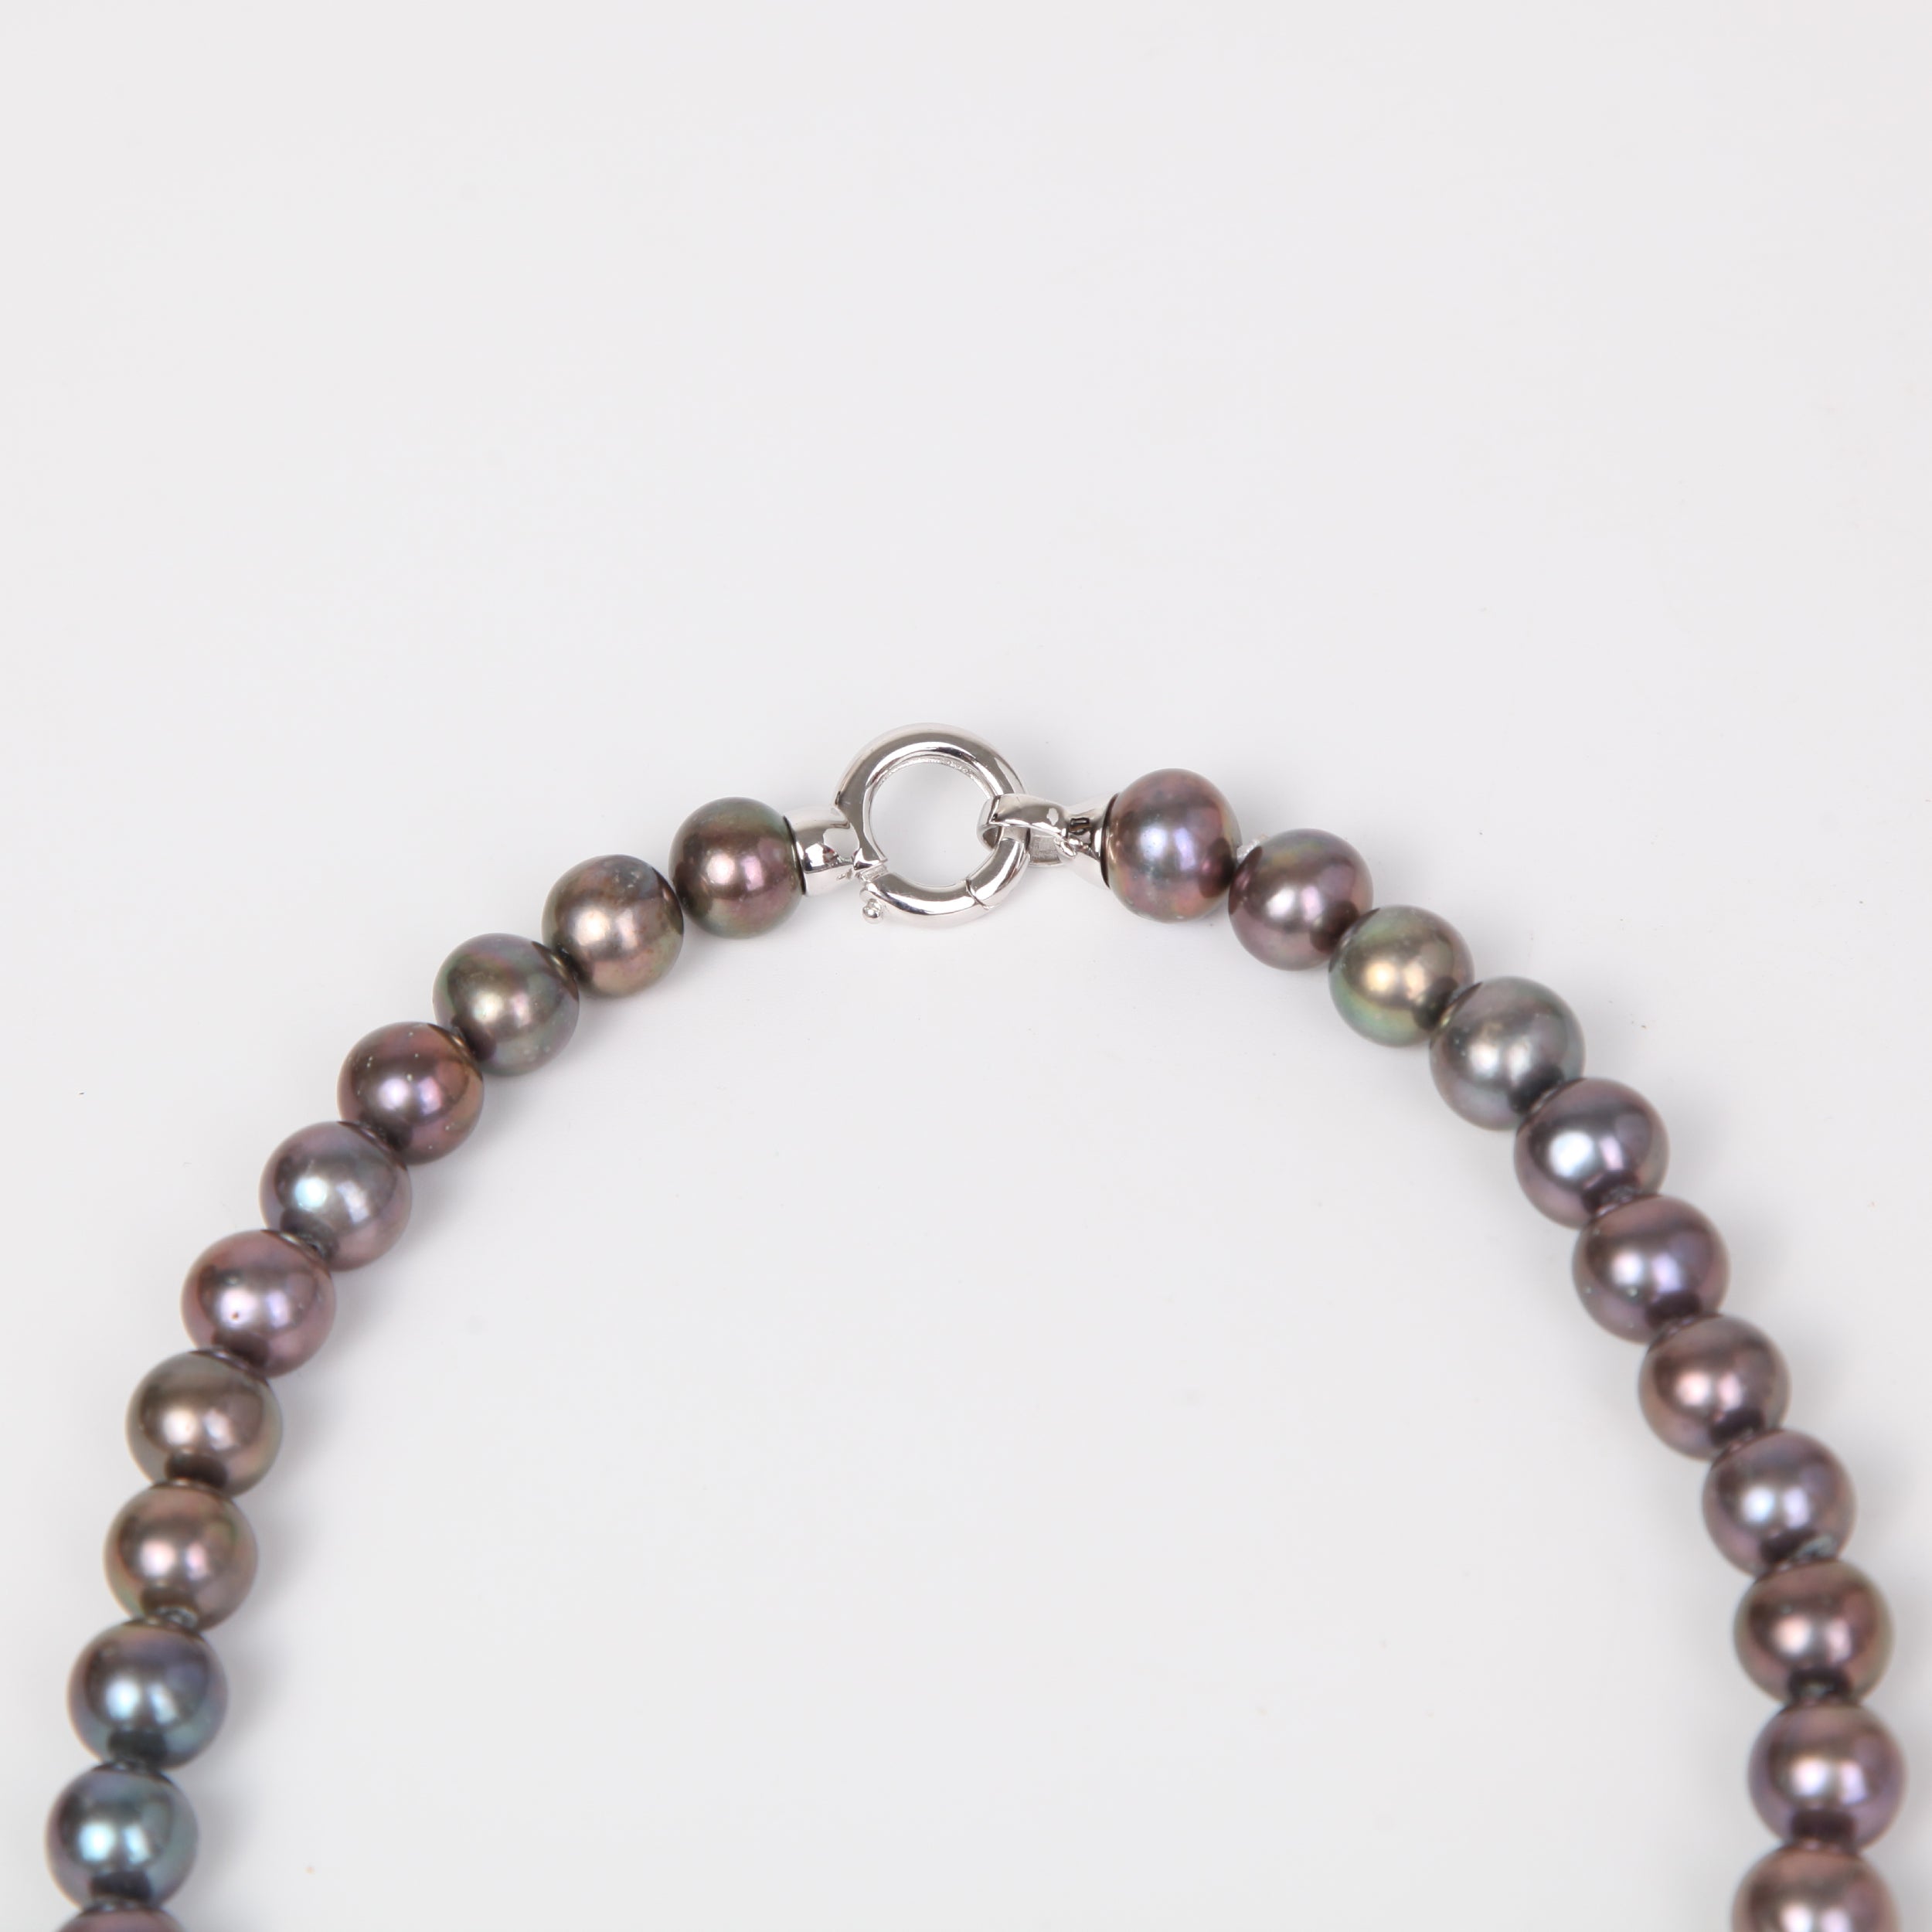 Dark Fresh Water Pearl Necklace with Sterling Silver